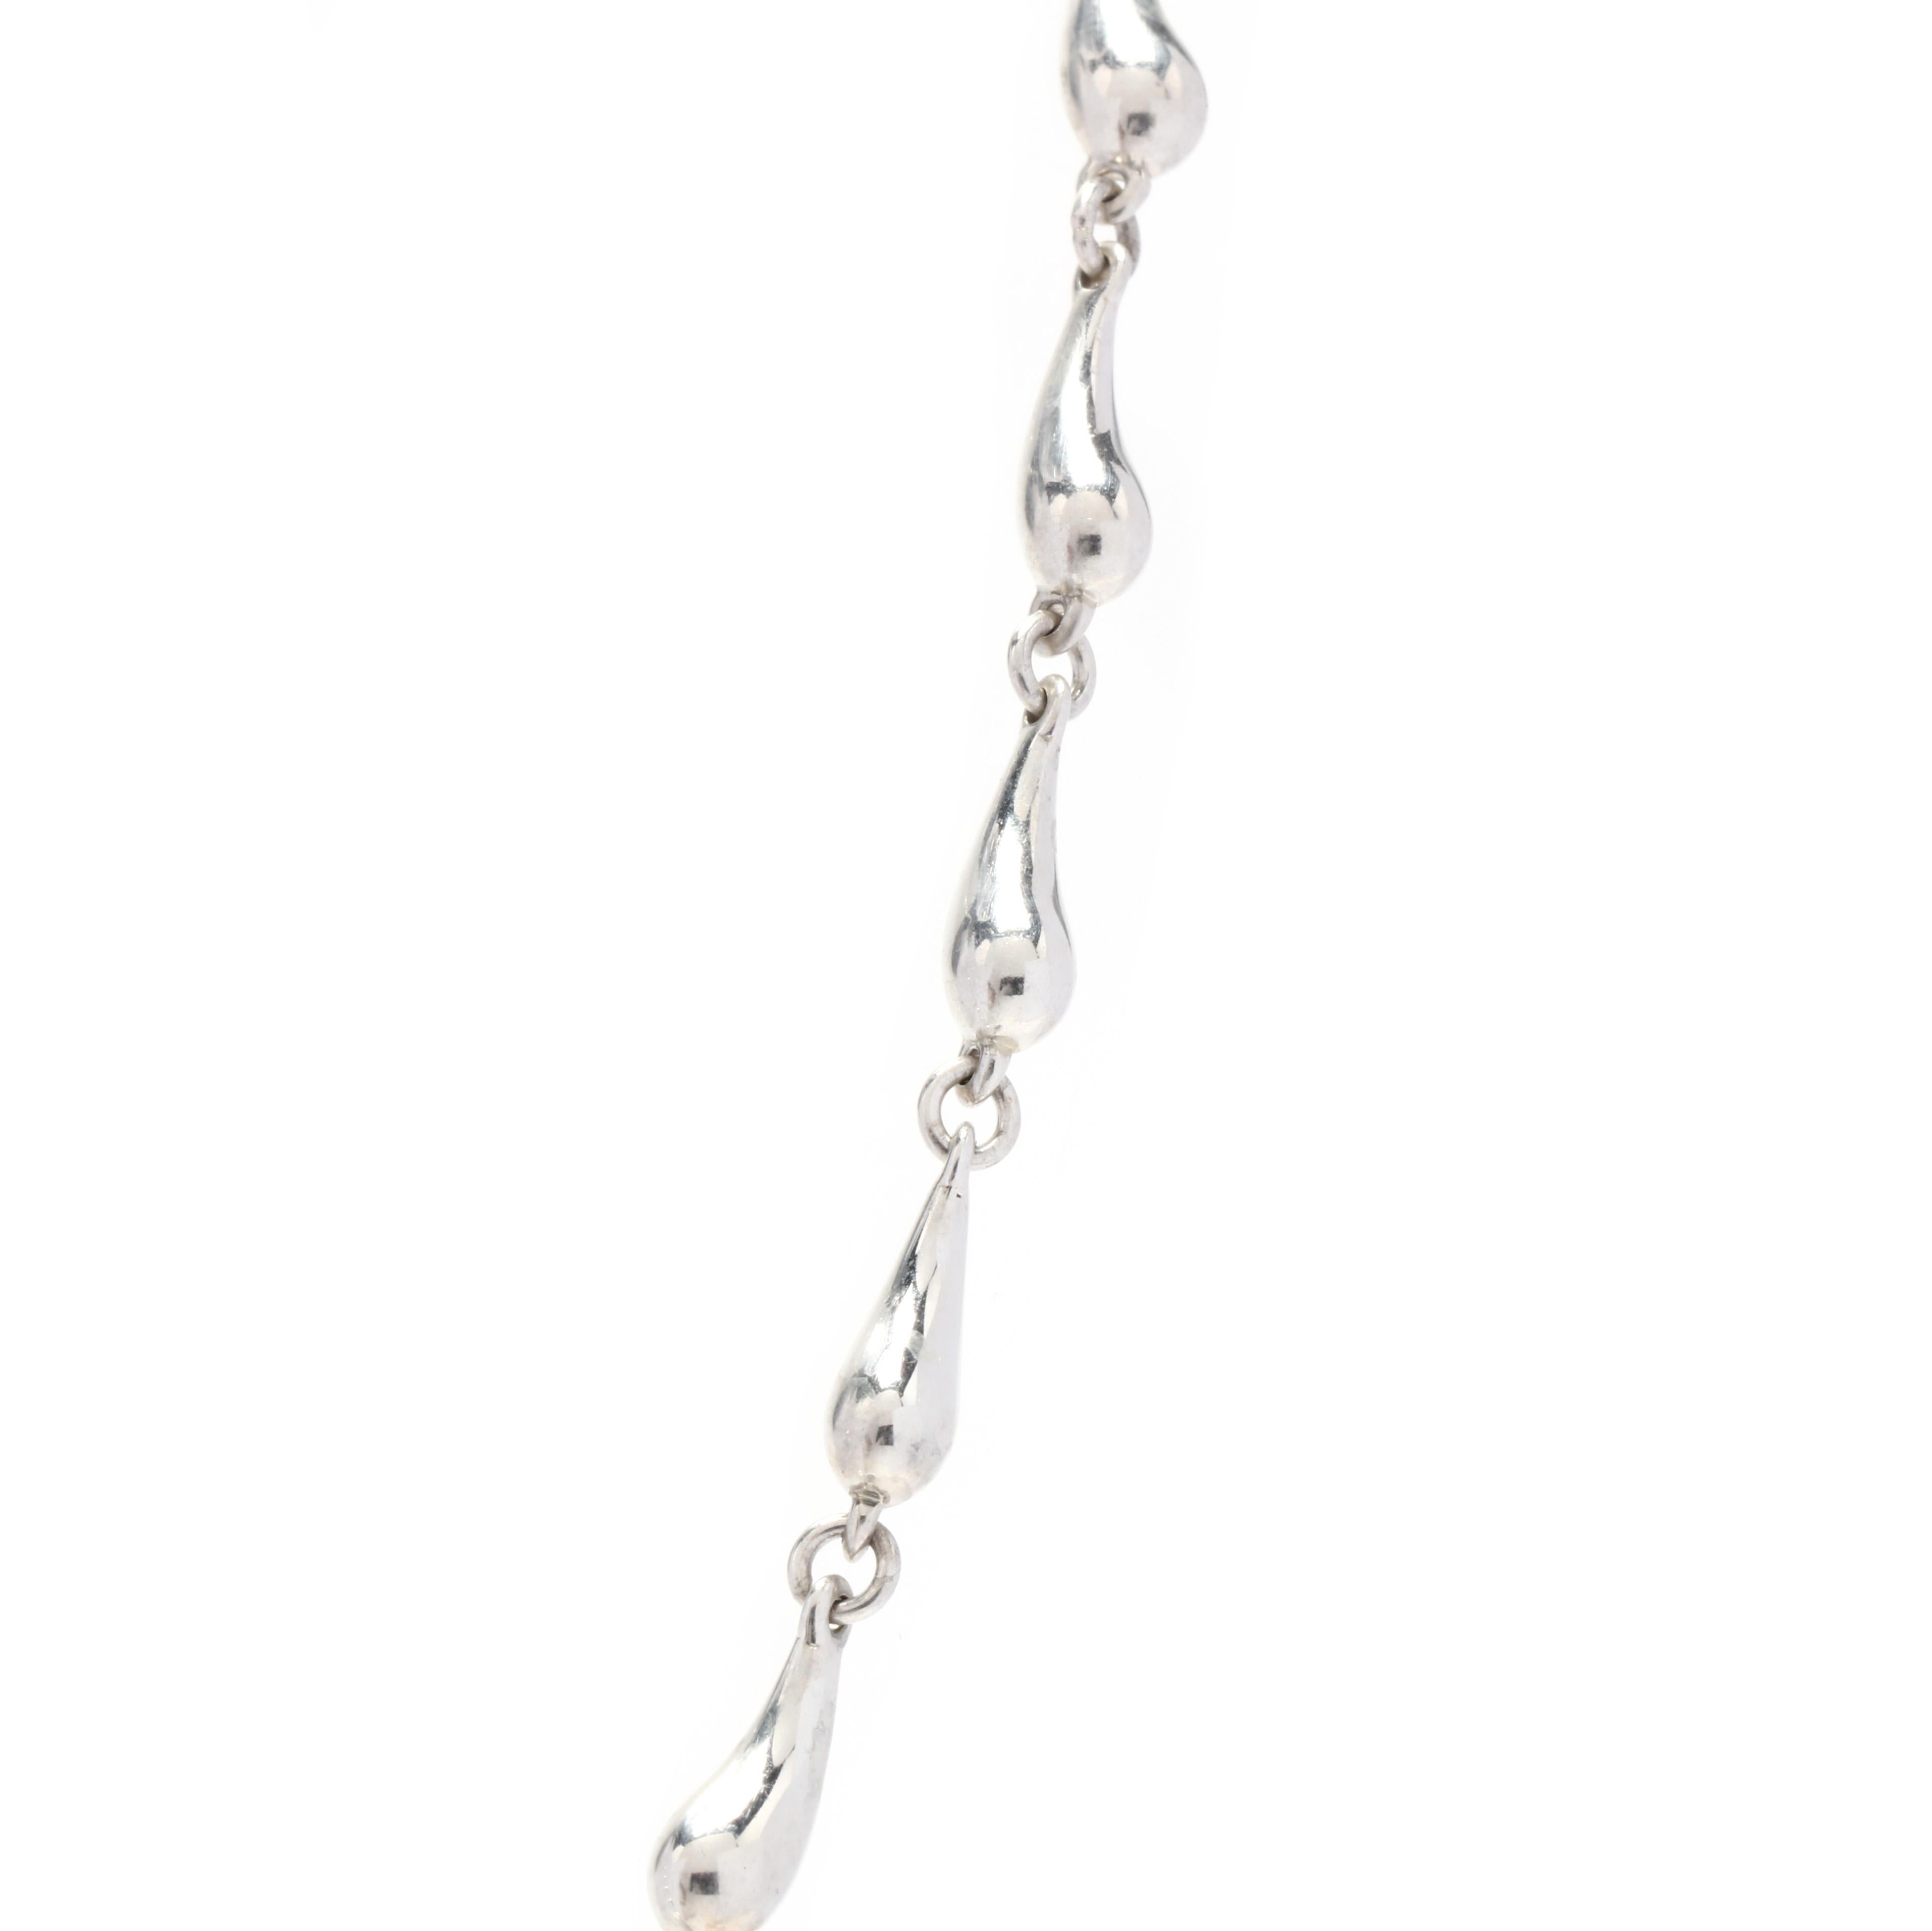 A sterling silver teardrop eternity chain design by Elsa Peretti for Tiffany & Company. This chain features teardrop motif links in an eternity design with a C clasp.

Length: 16 in.

Width: 3.6 mm

Weight: 16.5 grams